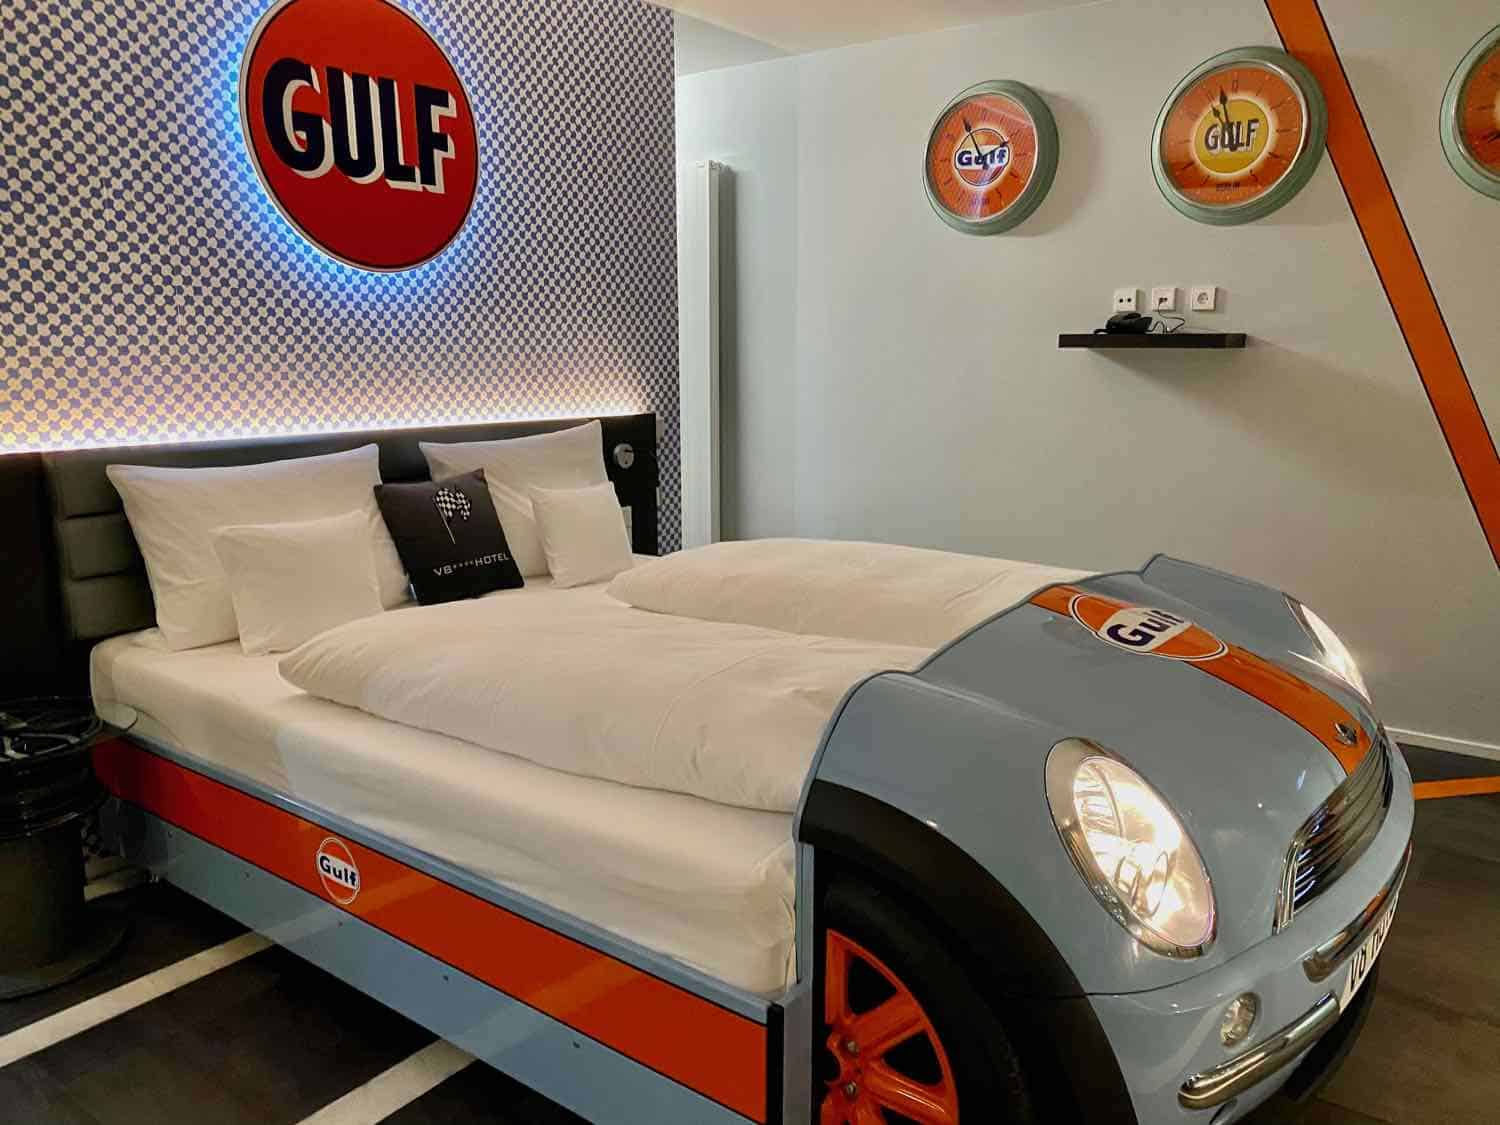 Bed made out of a mini-cooper car